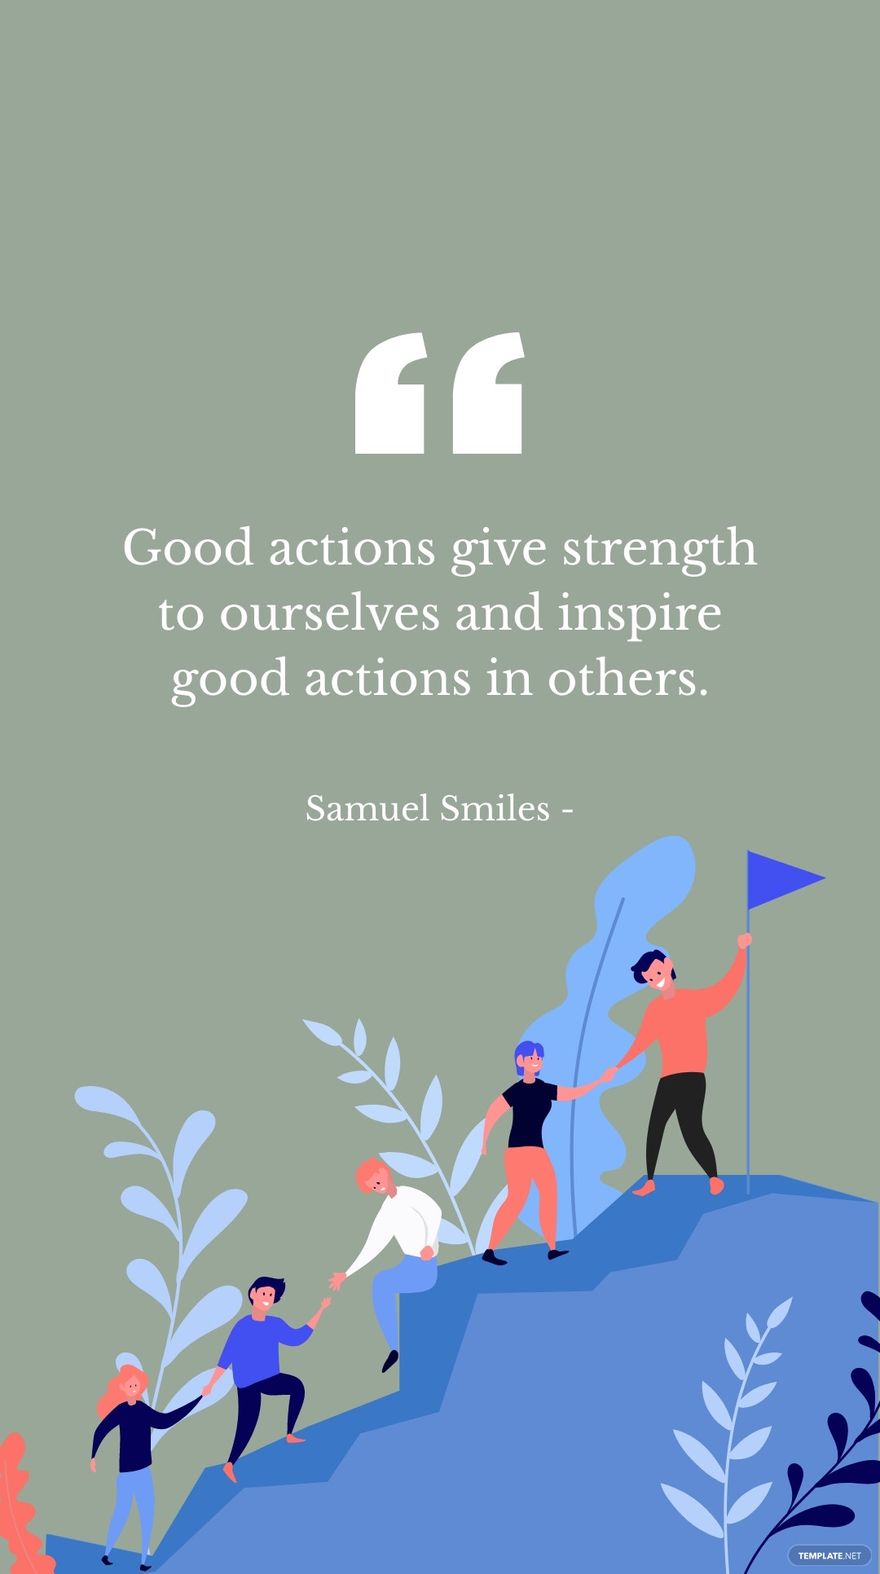 Samuel Smiles - Good actions give strength to ourselves and inspire good actions in others. in JPG